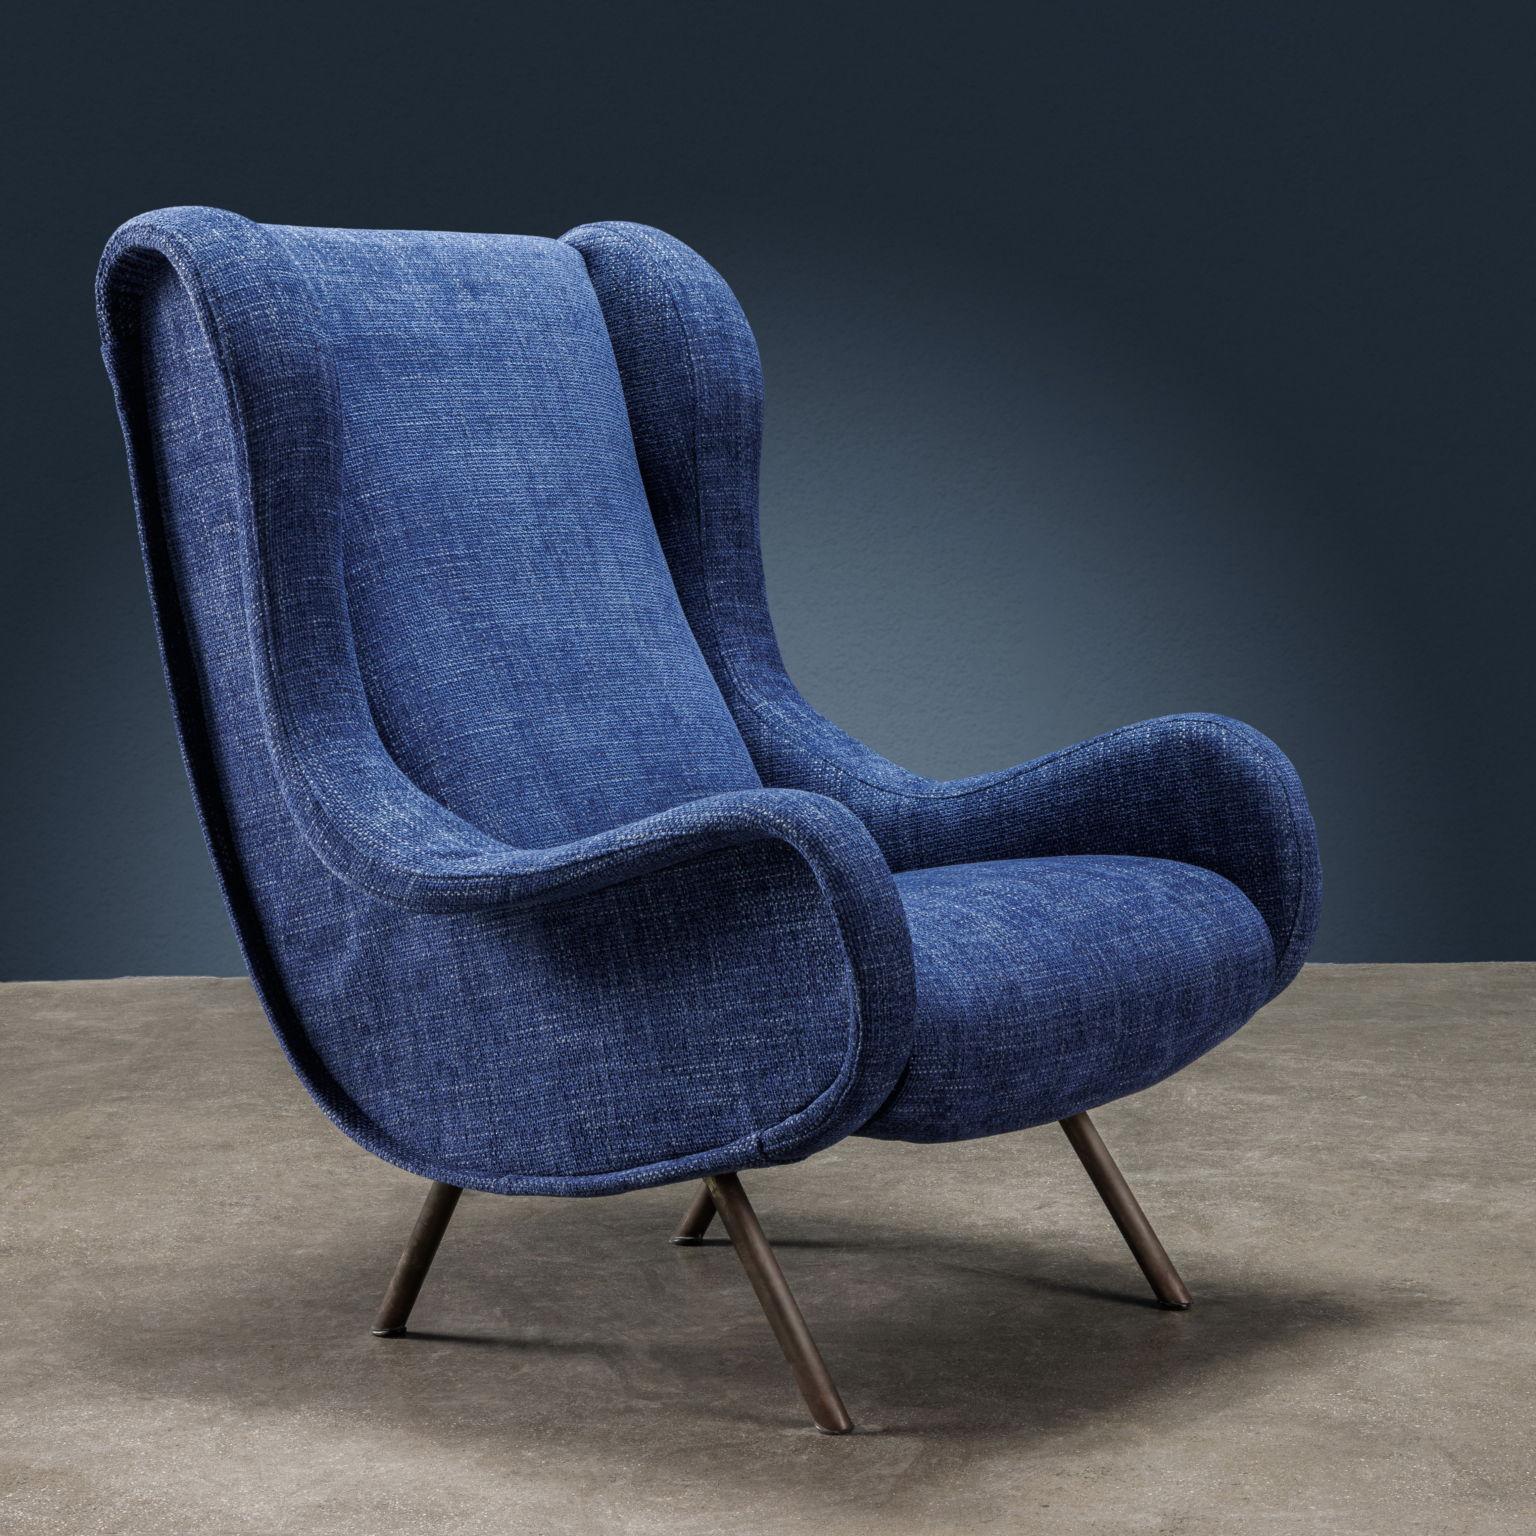 Pair of Senior model bergere armchairs, designed by Marco Zanuso and produced by Arflex starting from 1951. Padded in foam, they have a new fabric covering in shades of blue and white while the legs are in metal and brass.